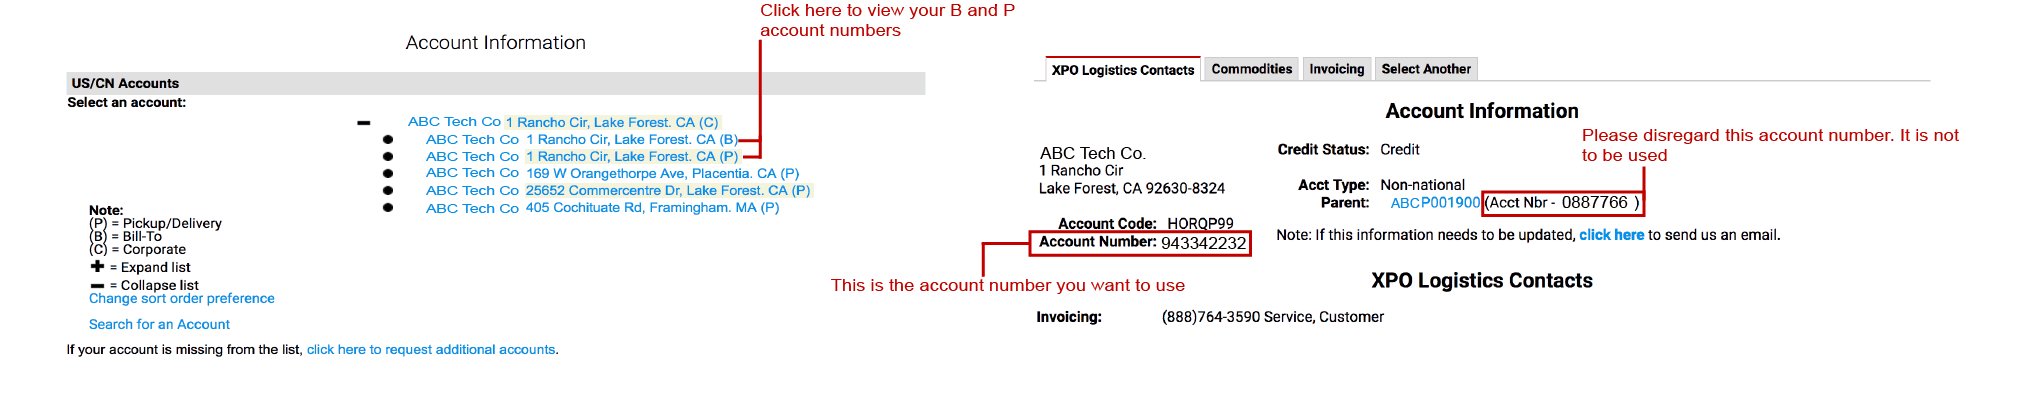 XPO B and P account numbers